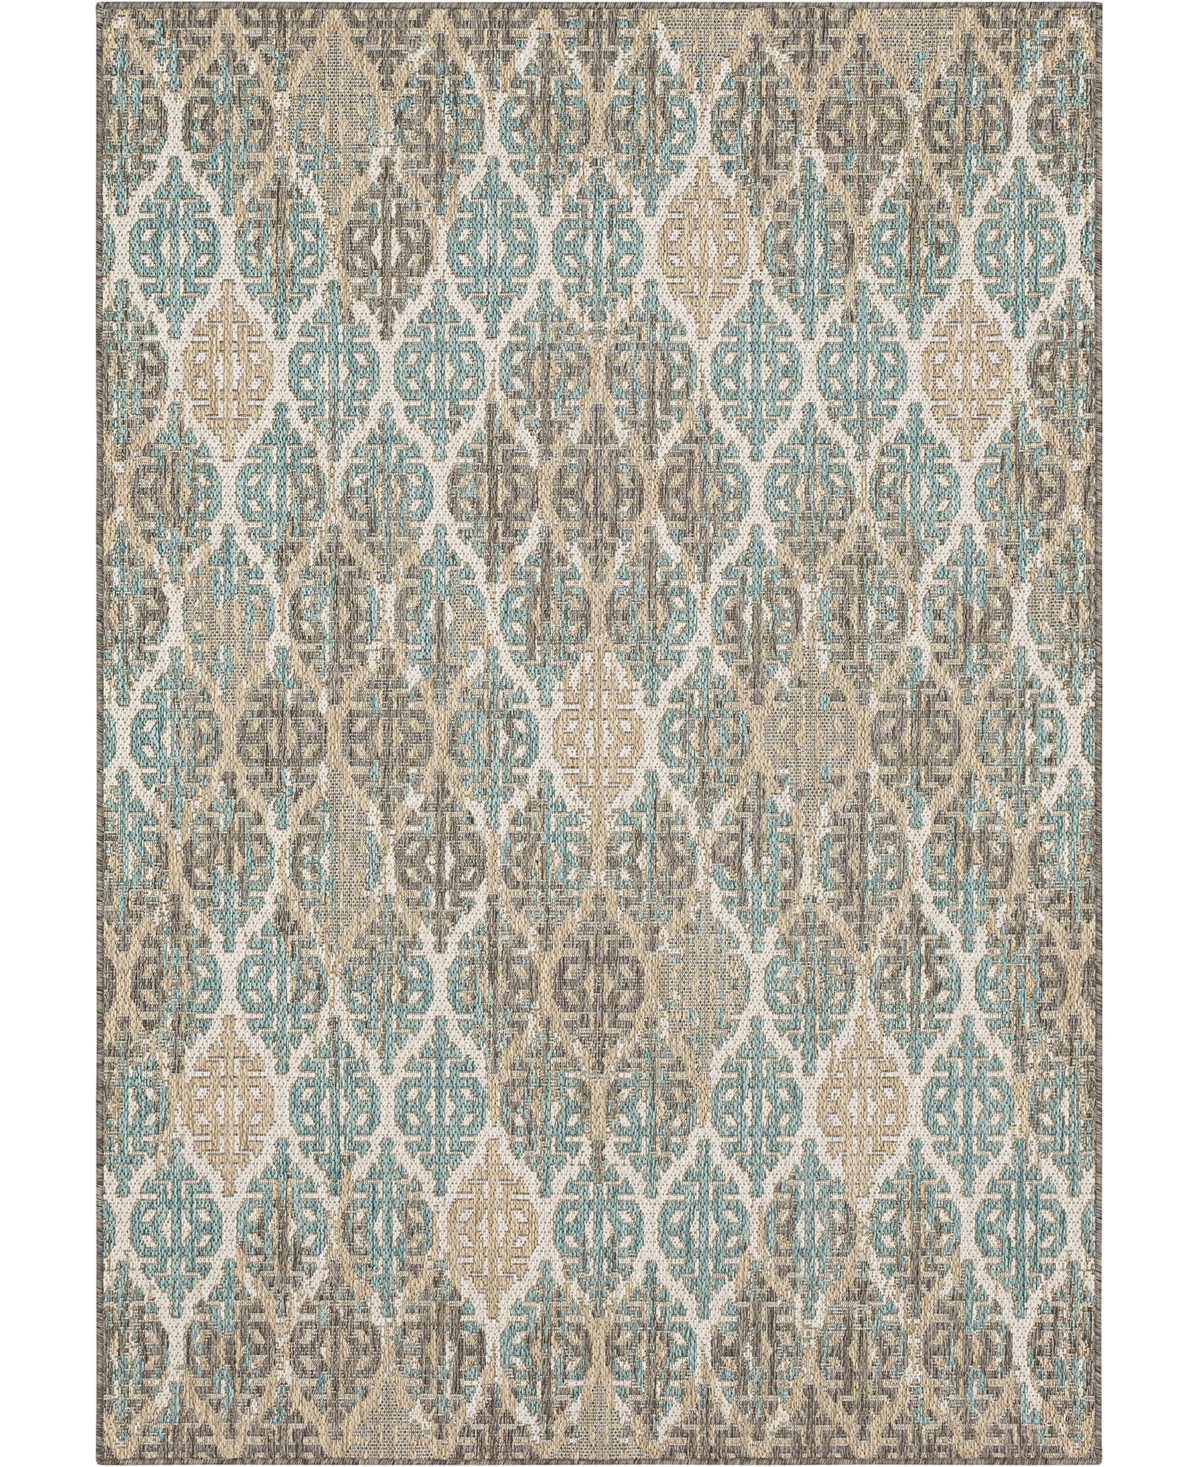 Mohawk Malibu Outdoor Stamped Ikat 5'3" X 7'6" Area Rug In Silver